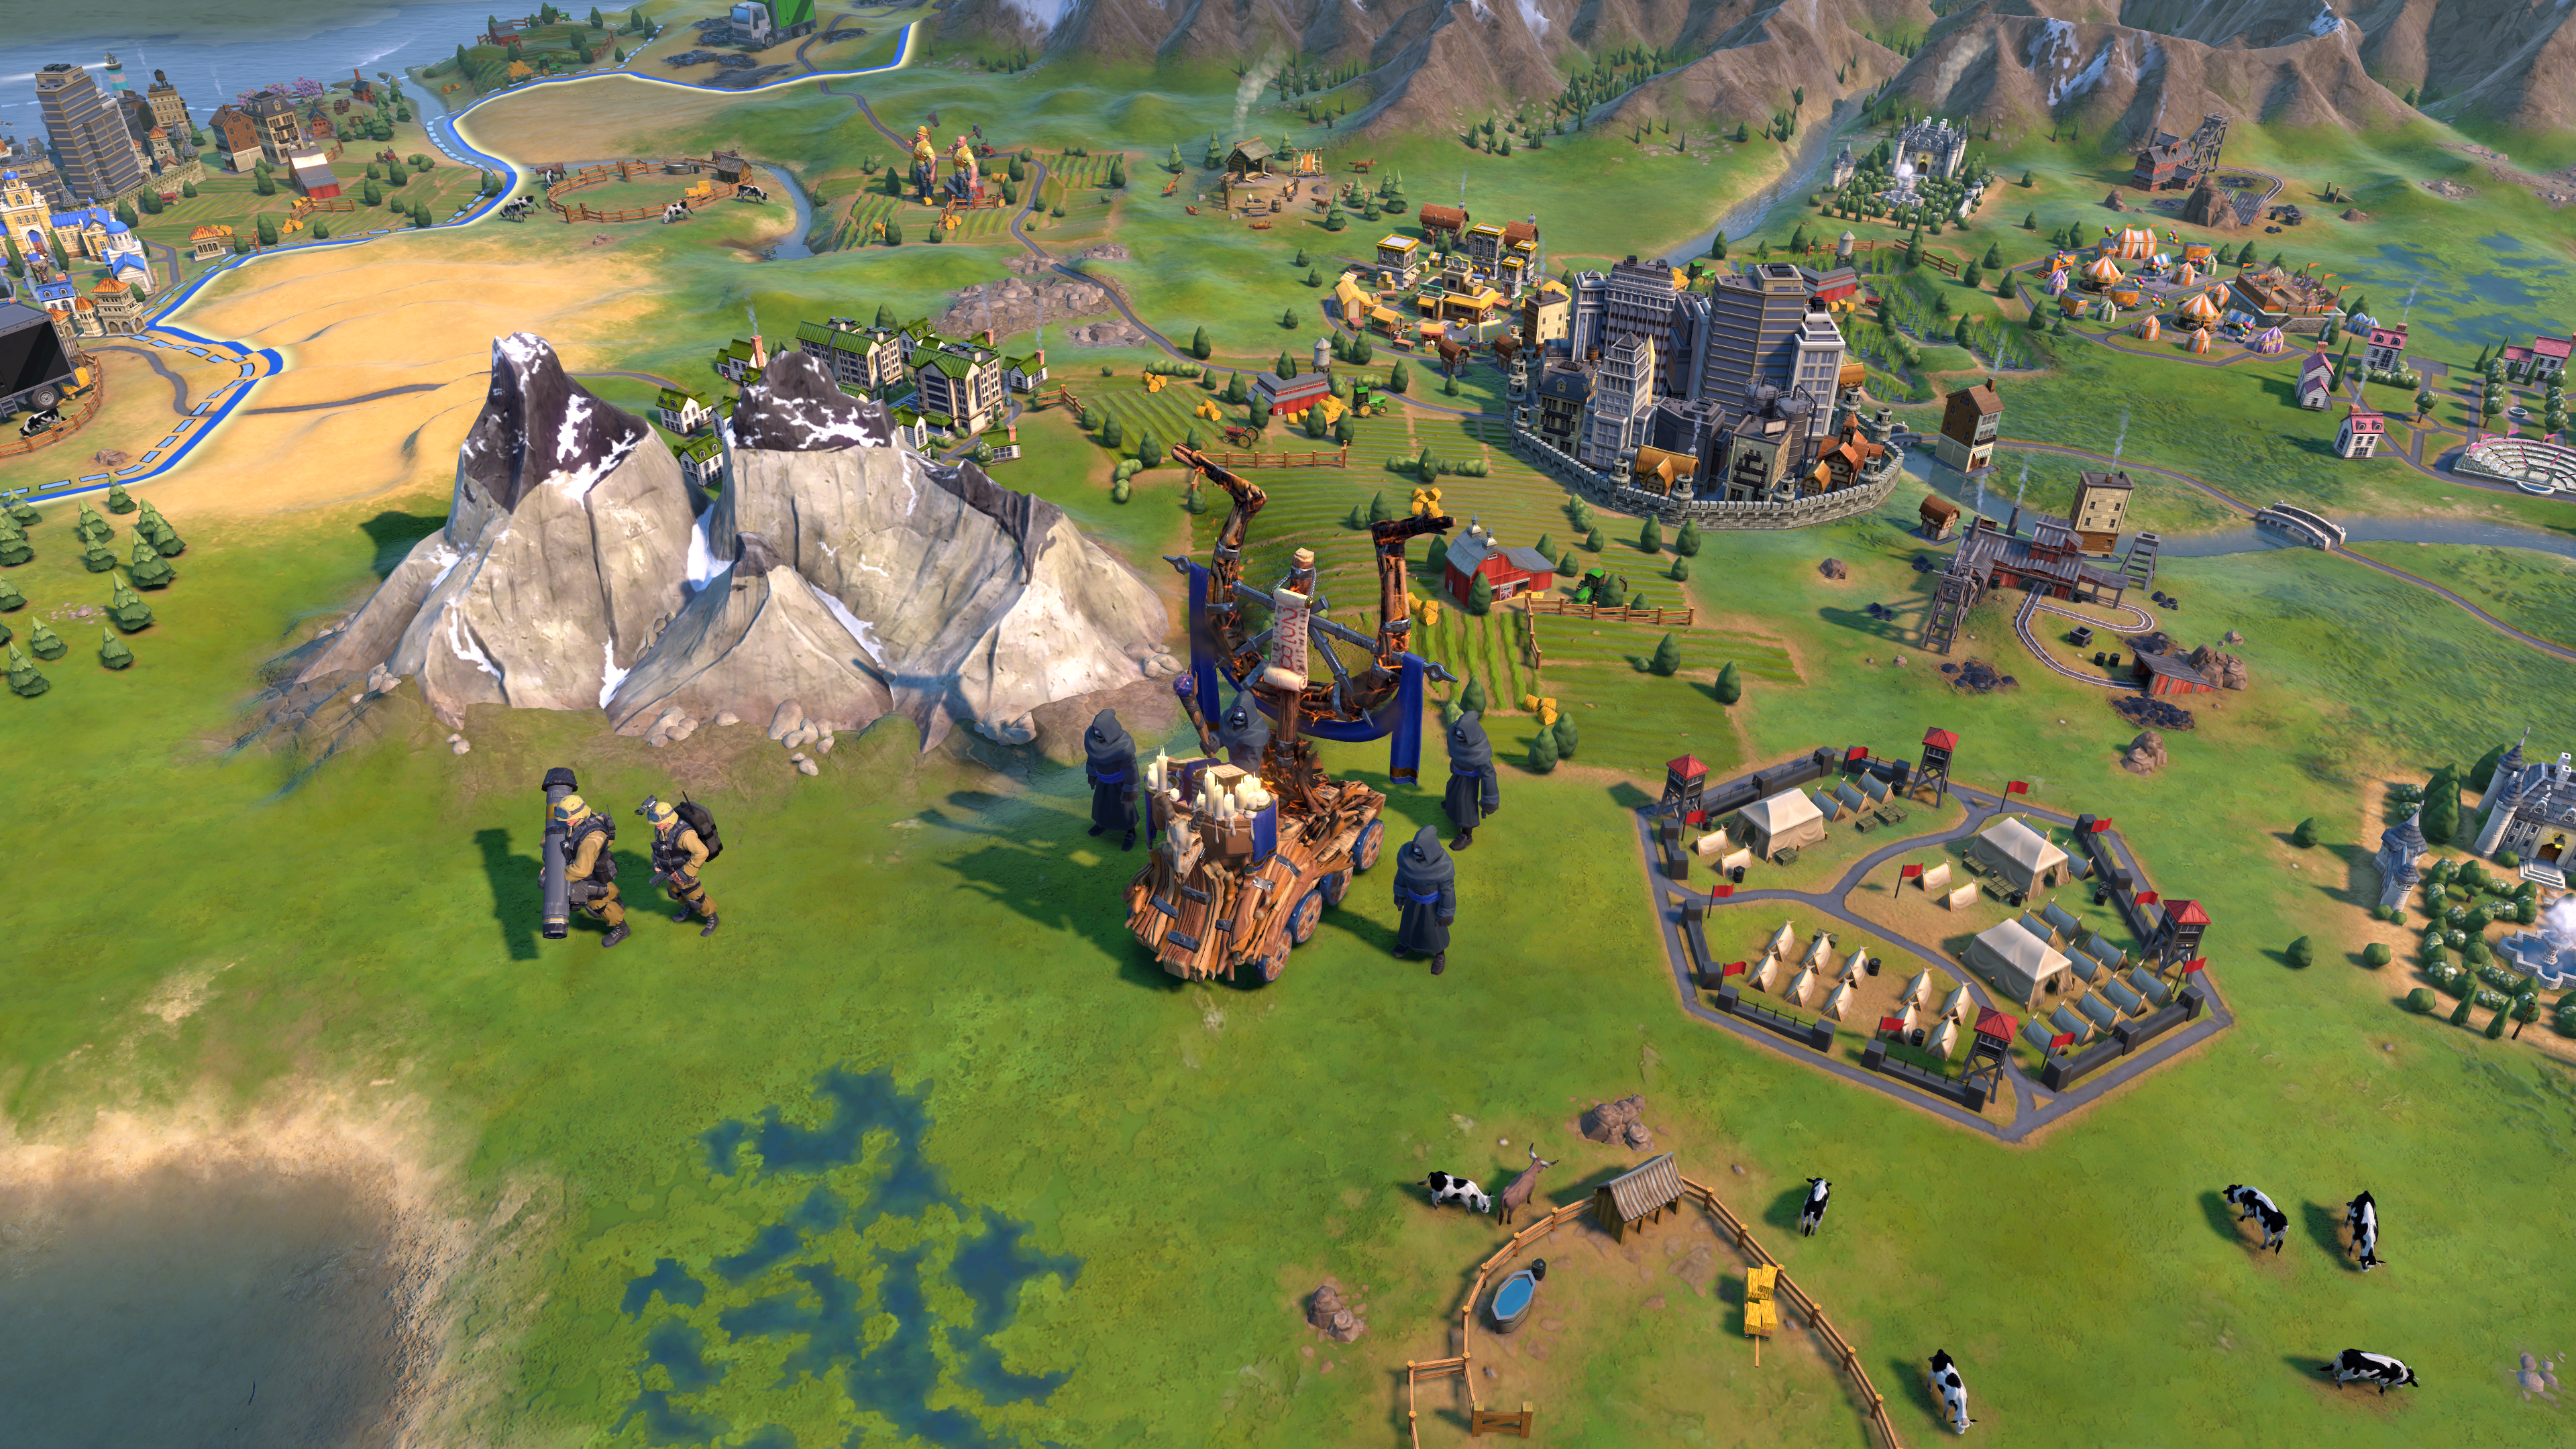 Civilization-VI-New-Frontier-Pass-Maya-Gran-Colombia-Pack-Apocalypse-Mode-Soothsayer-Unit